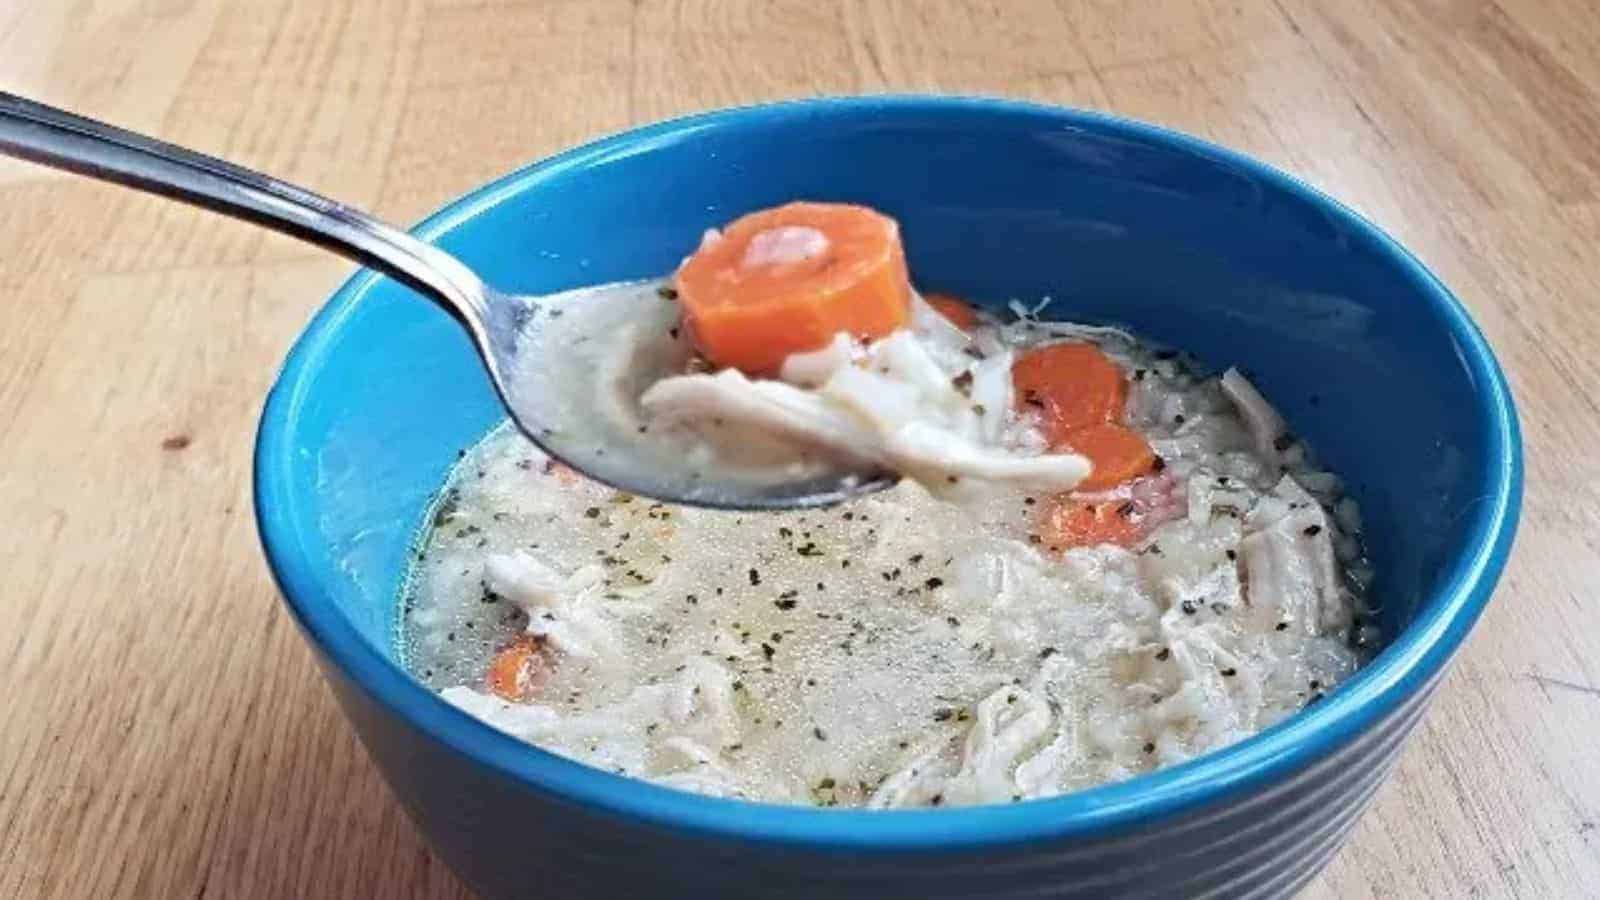 Image shows Chicken and rice soup on a spoon with the full blue bowl behind it.